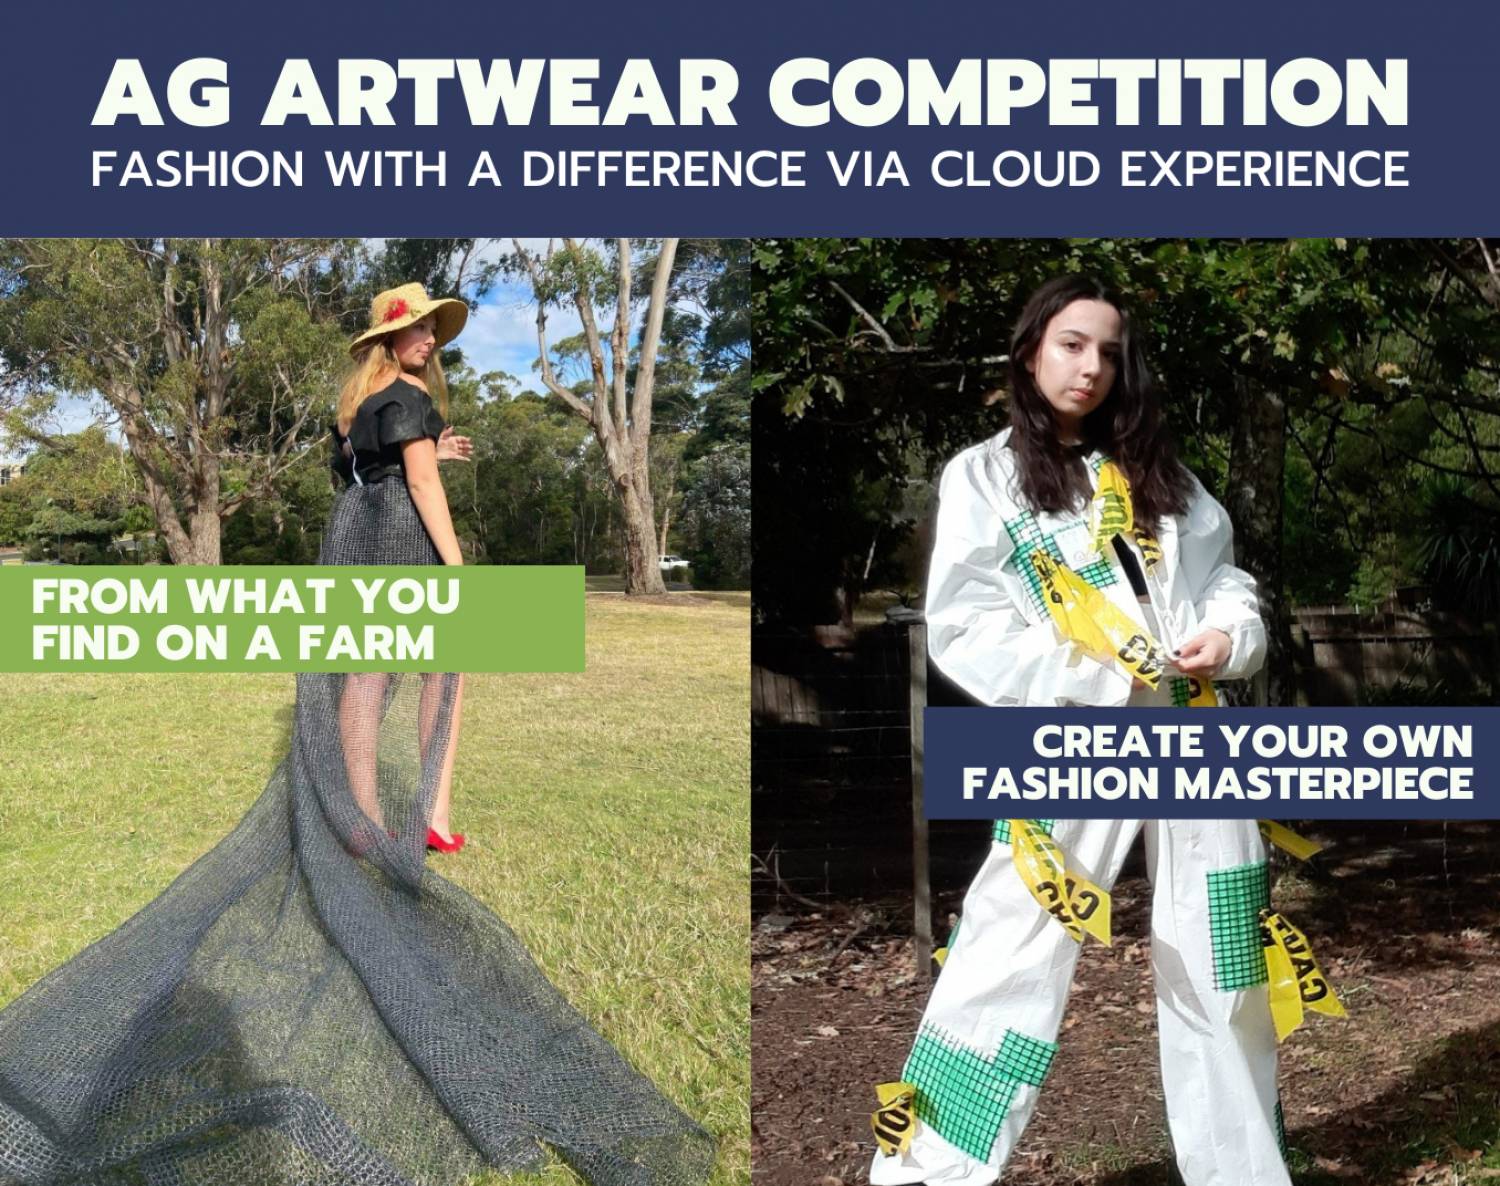 AG ARTWEAR COMPETITION 1356 1072 px 1